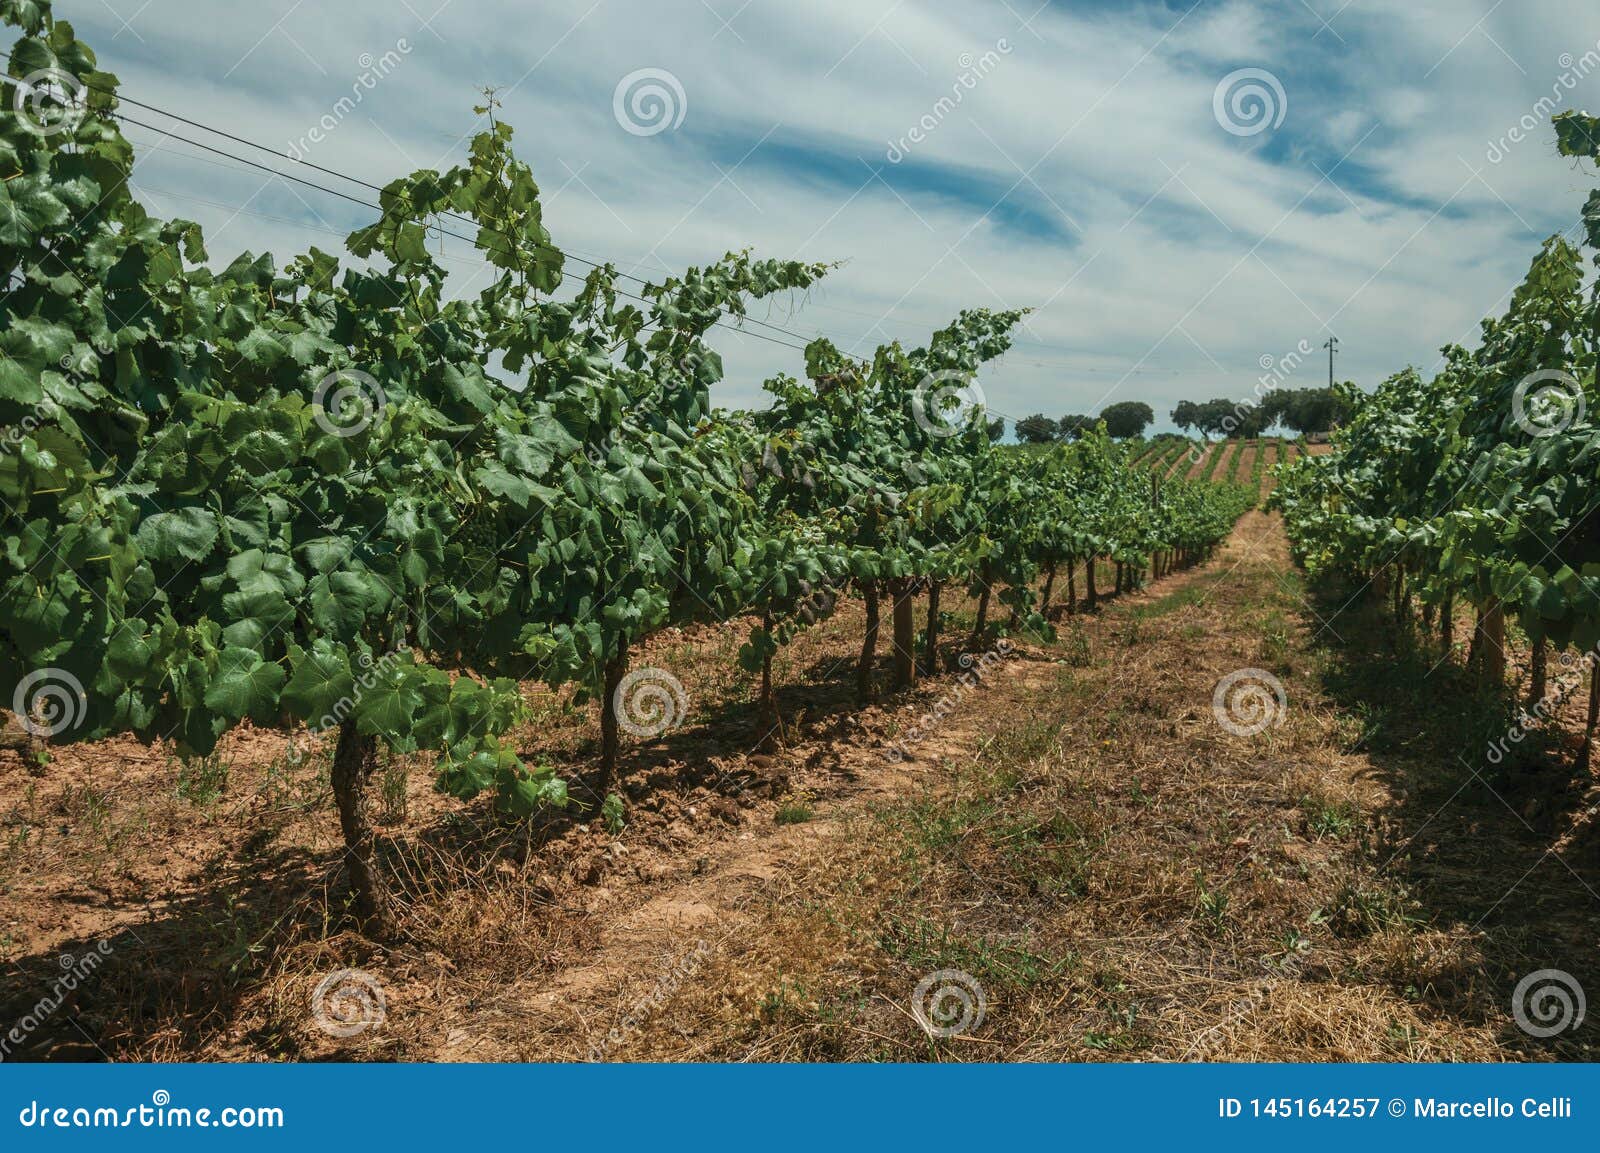 Lined Vines Going Up The Hill In A Vineyard Near Estremoz ...